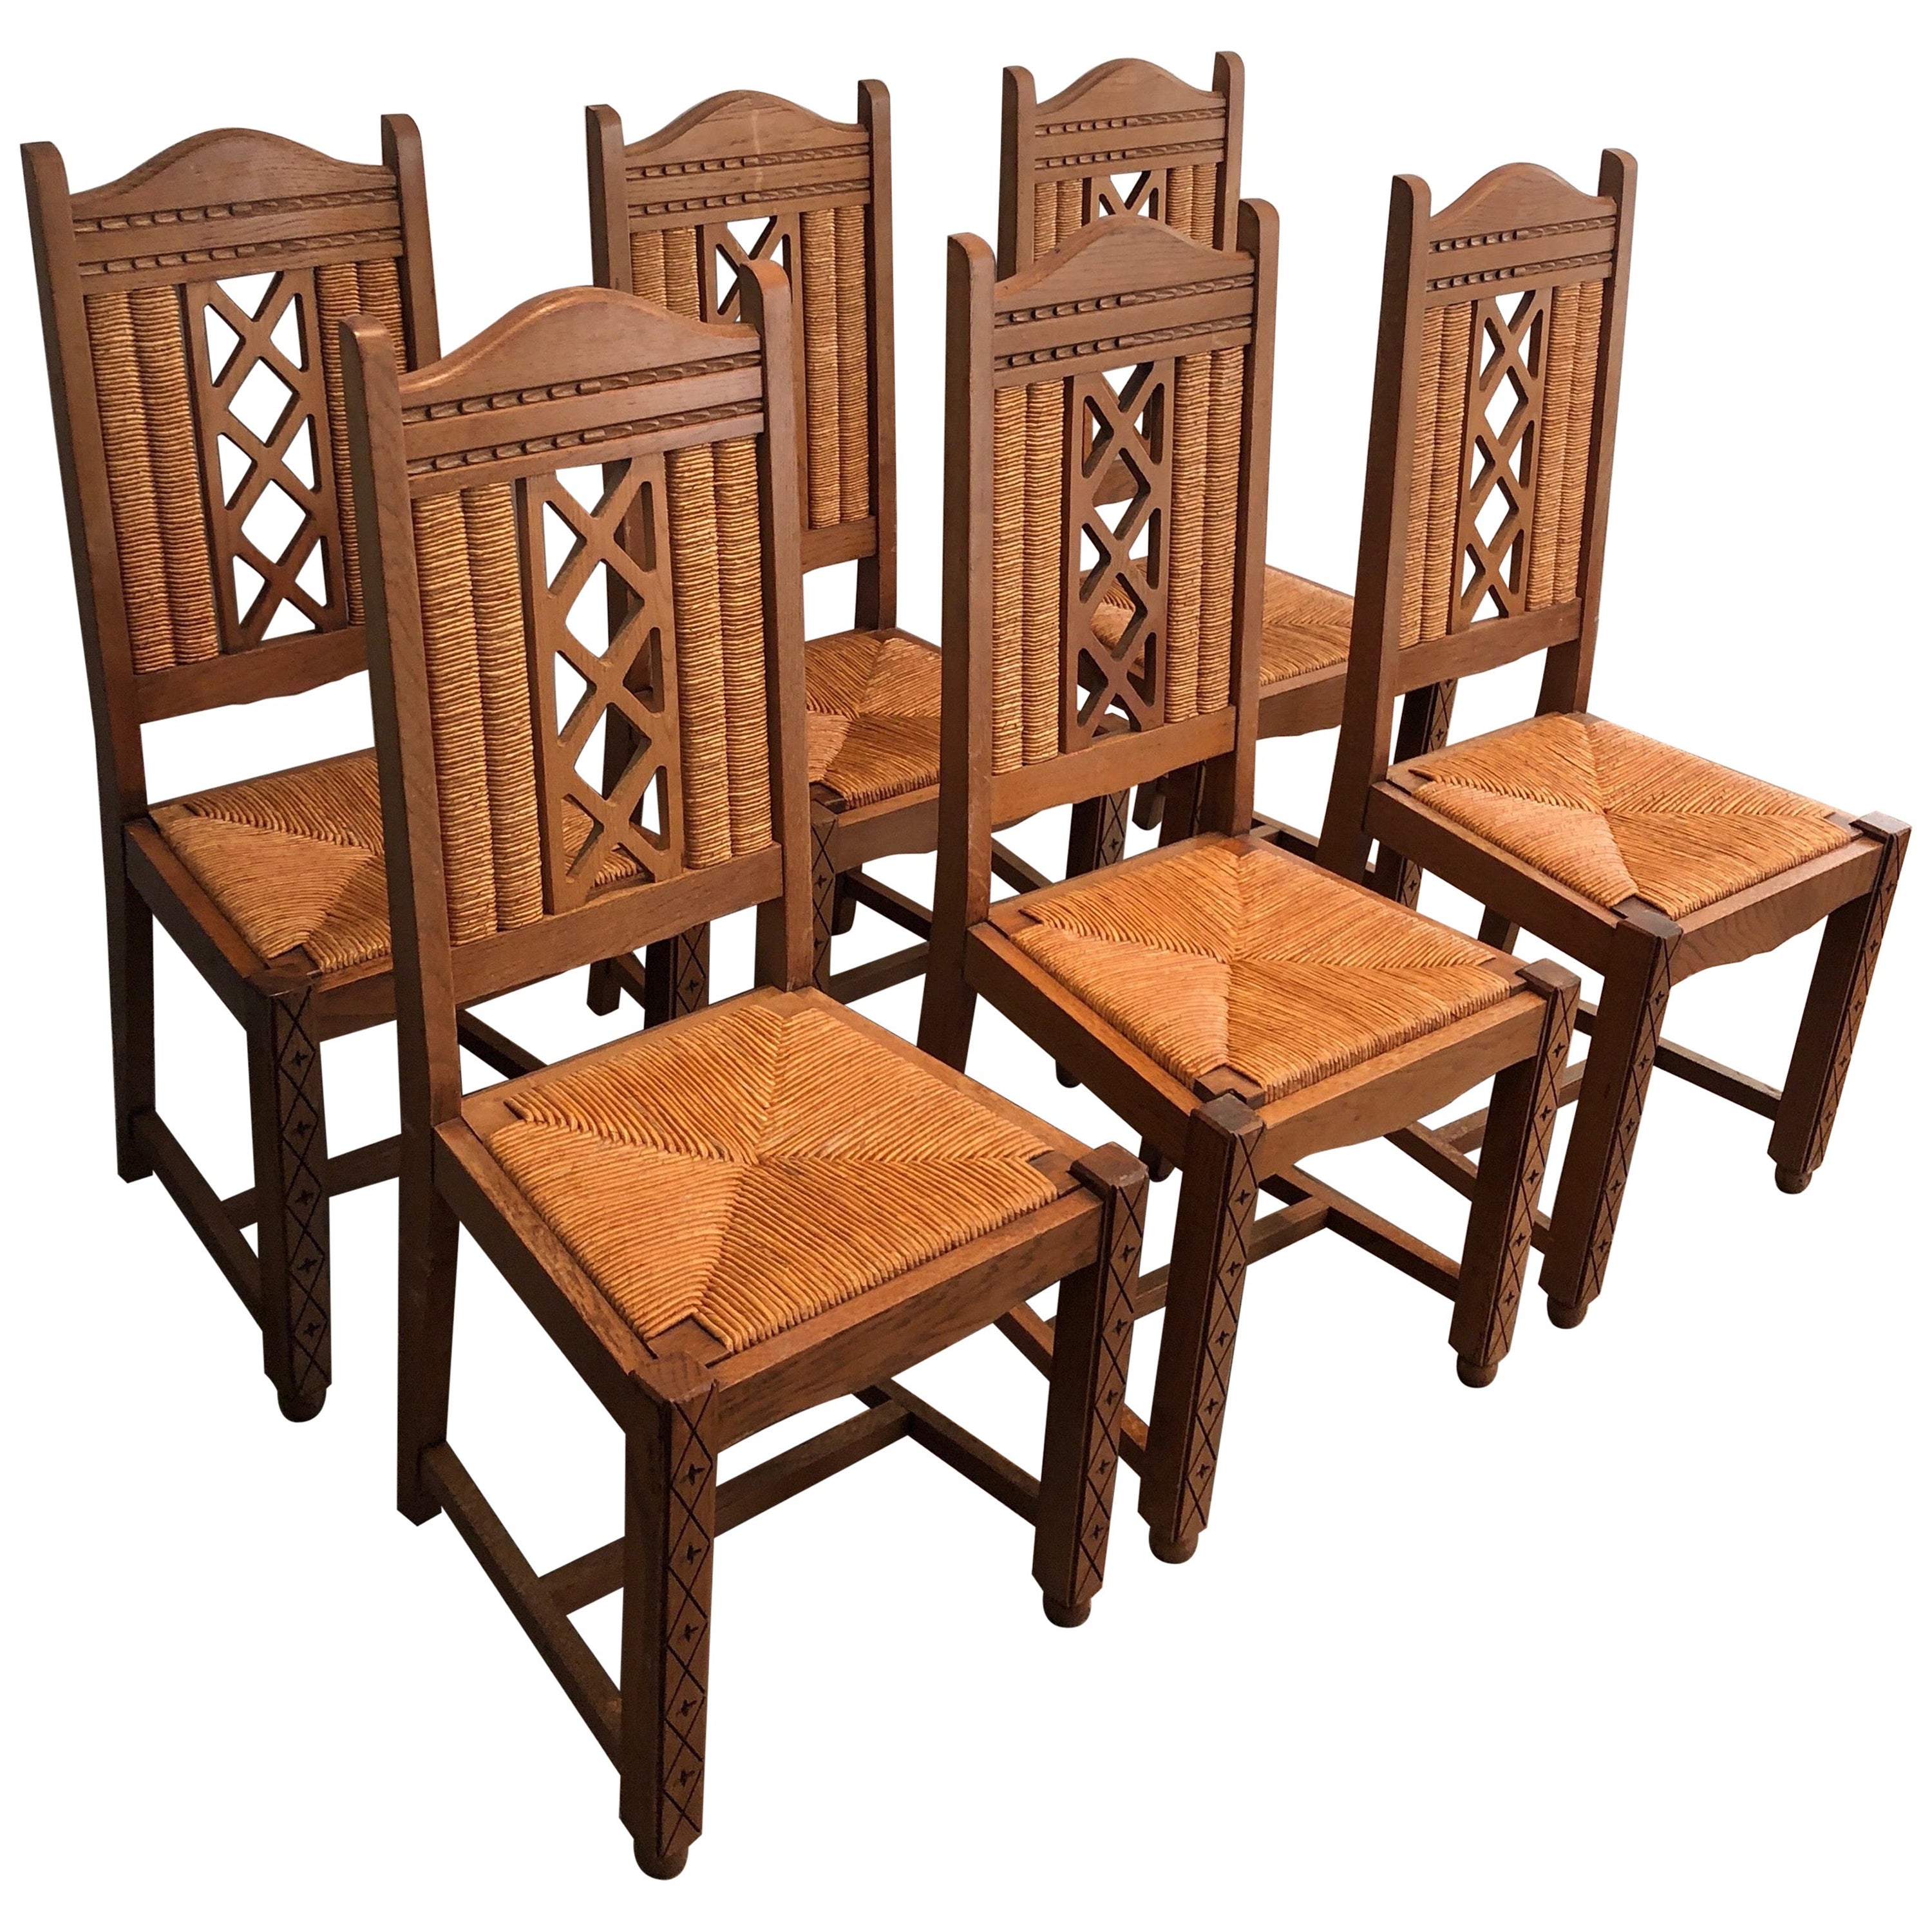 Set of 6 Brutalist Chairs Made of Ash and Straw, French Work, Circa 1950